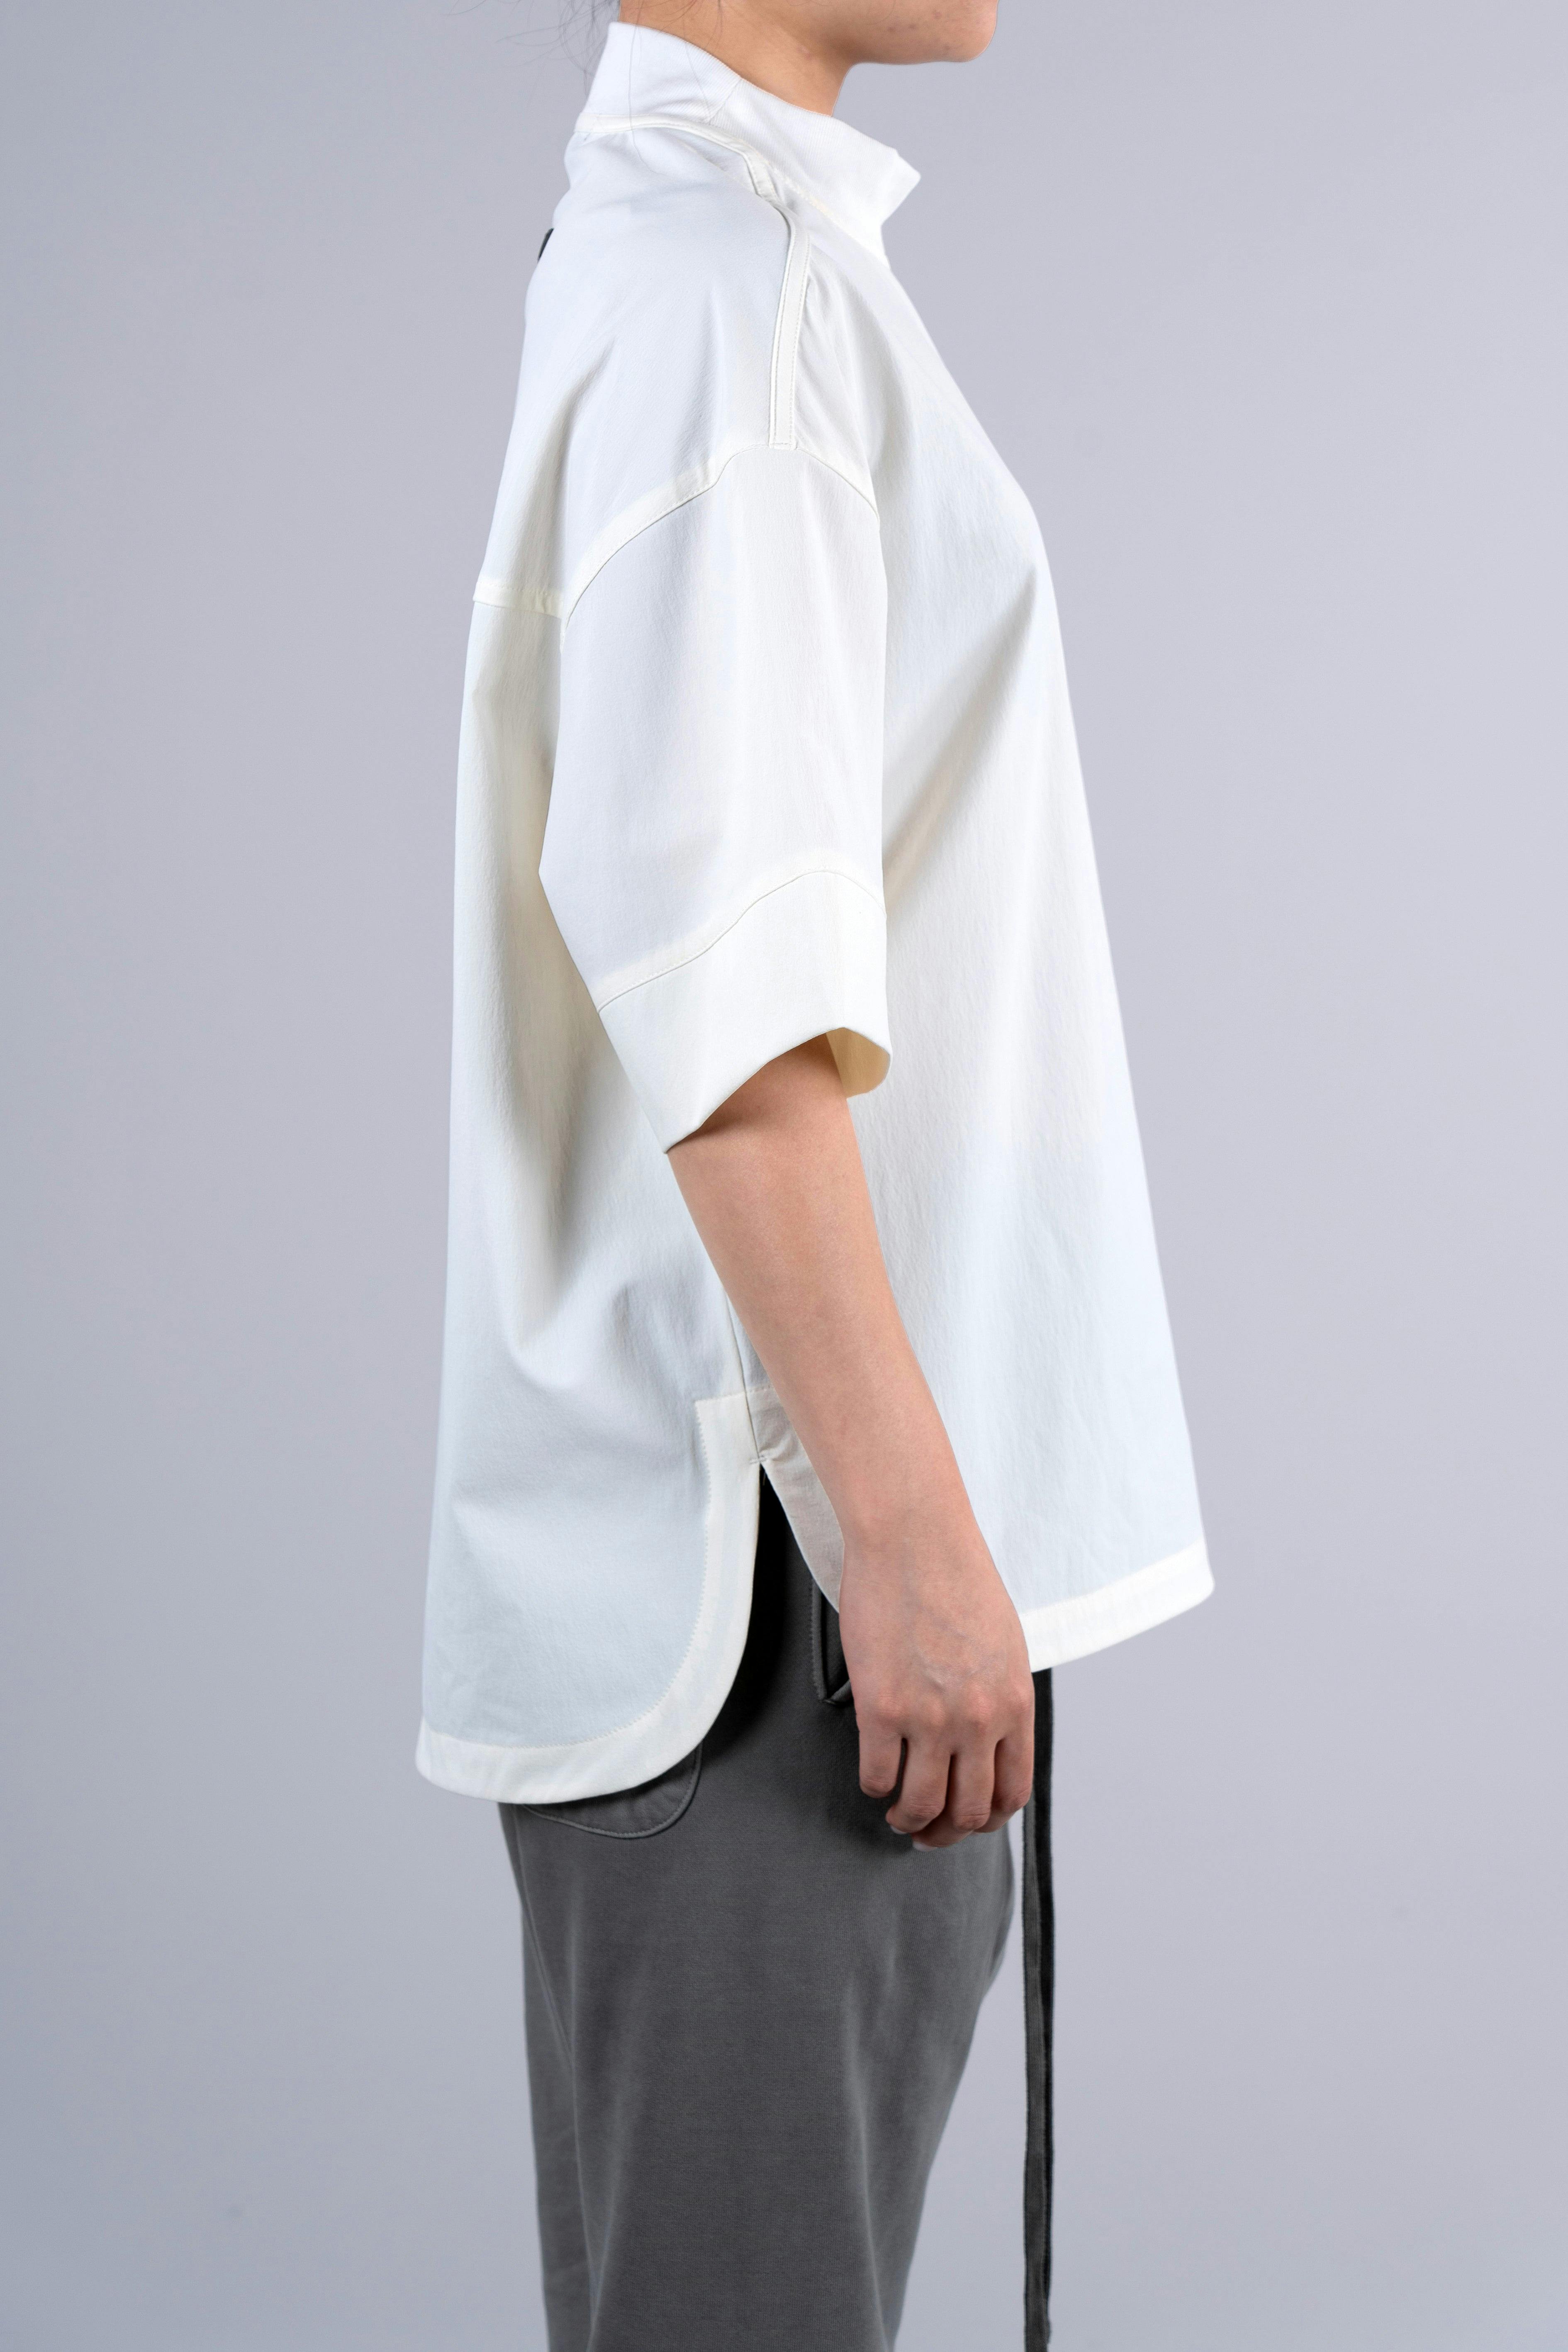 ˝INVERSE˝ Woven T-Shirt - Decayed White